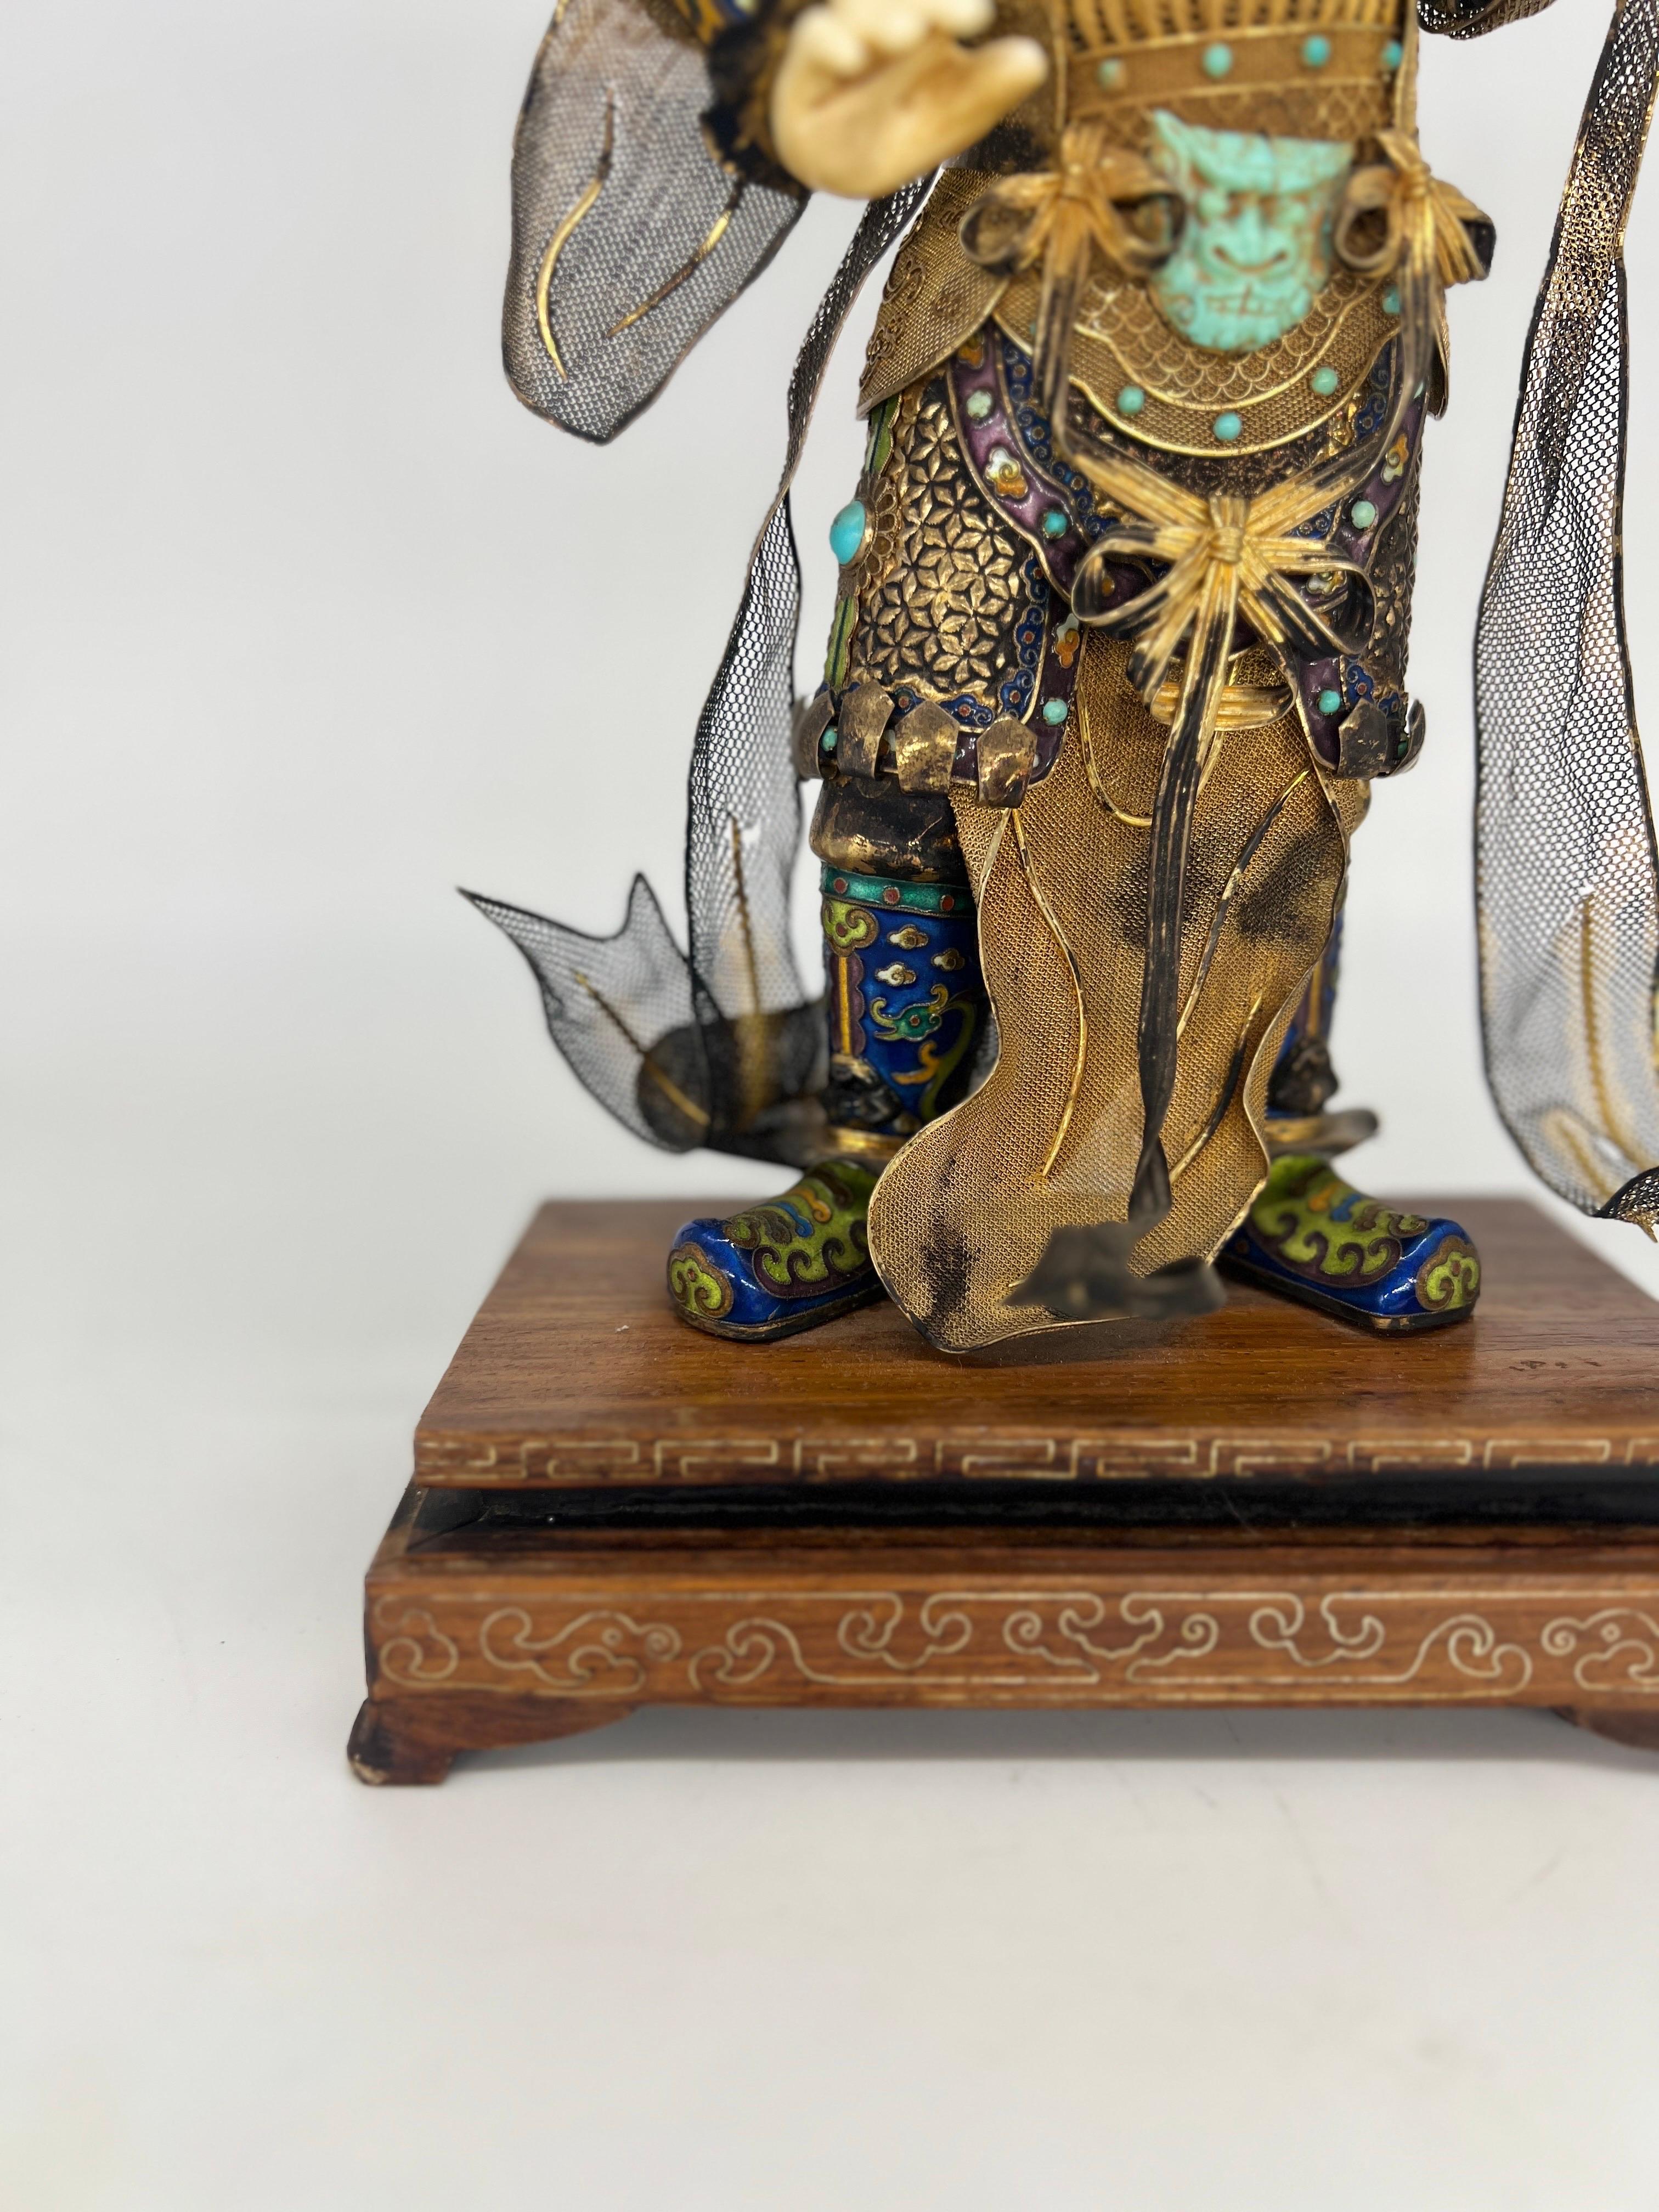 Antique Chinese Silver Gilt, Enamel & Turquoise Mounted Immortal Figurine. 
A very fine Chinese immortal figurine constructed using vermeil sterling silver intricately layered and fanned across the body. Each element of the body is covered in